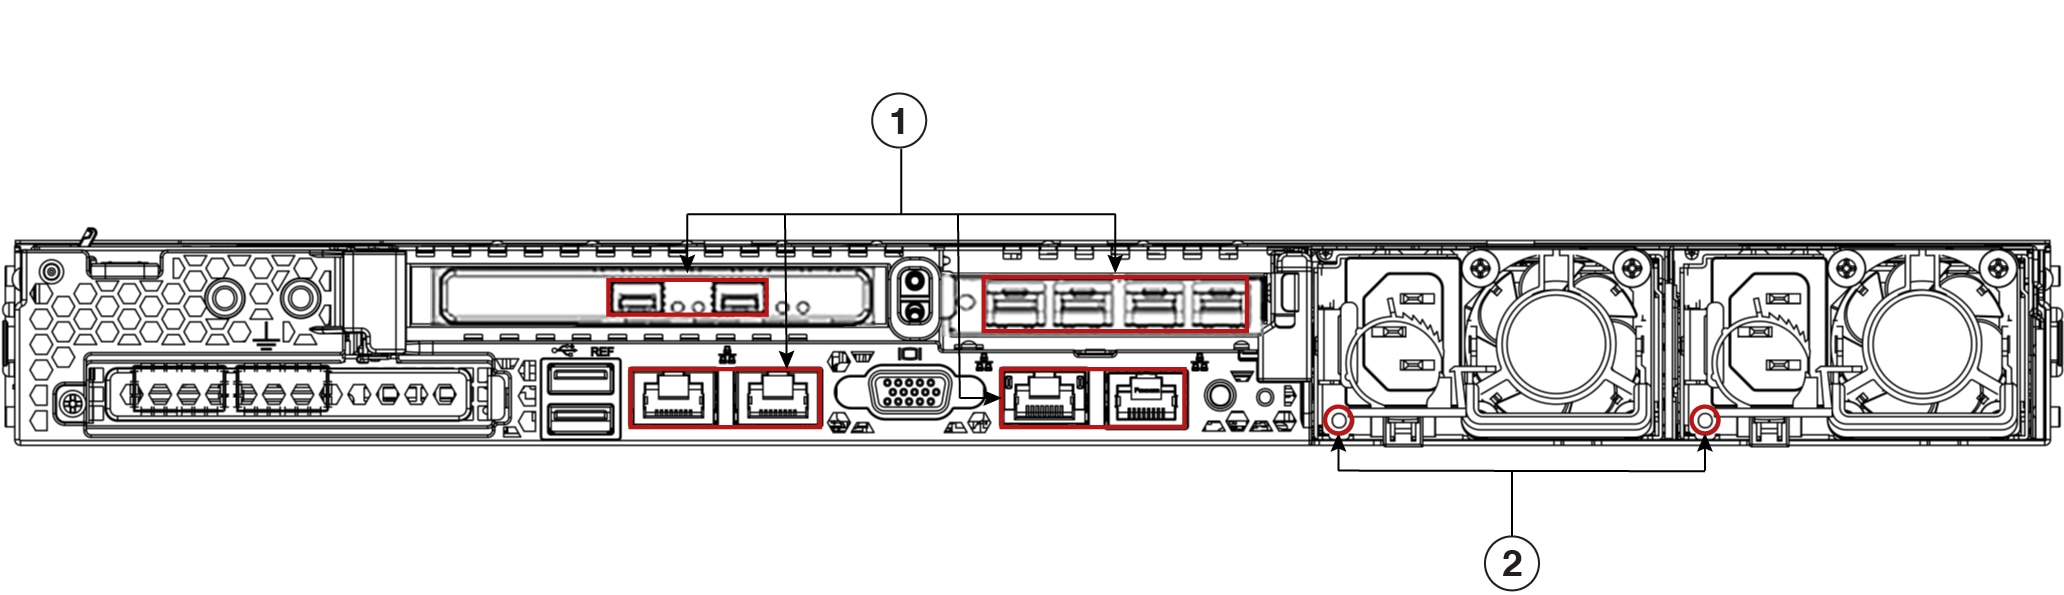 Figure 11: Rear panel LEDs on a 44 and 56-core appliance.